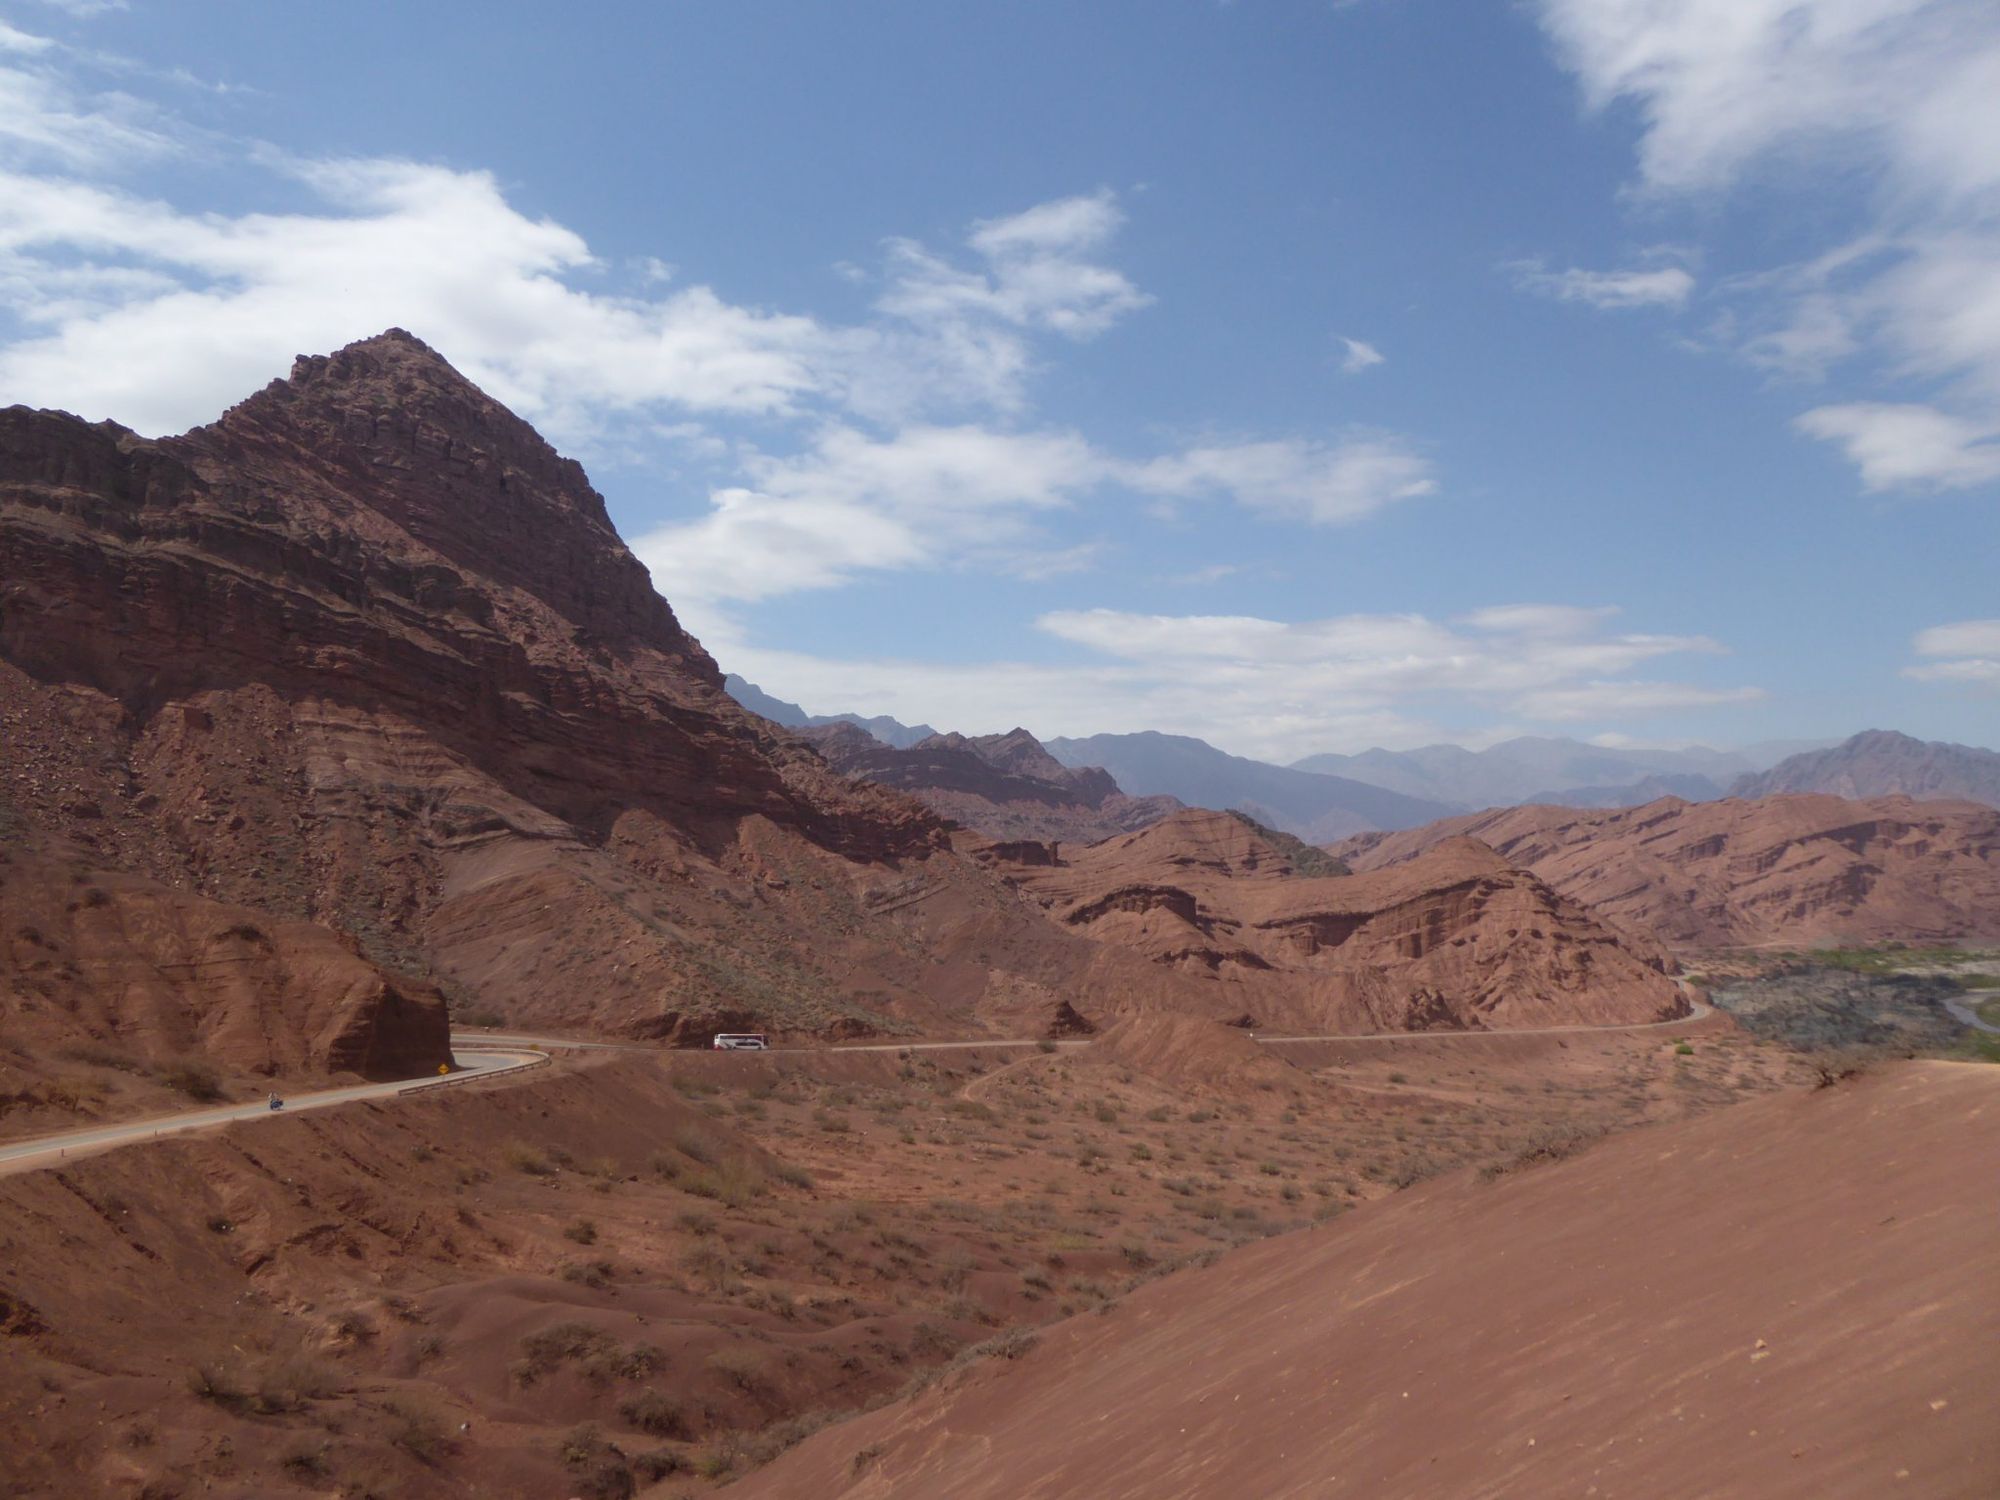 Salta: Gateway to the Andes